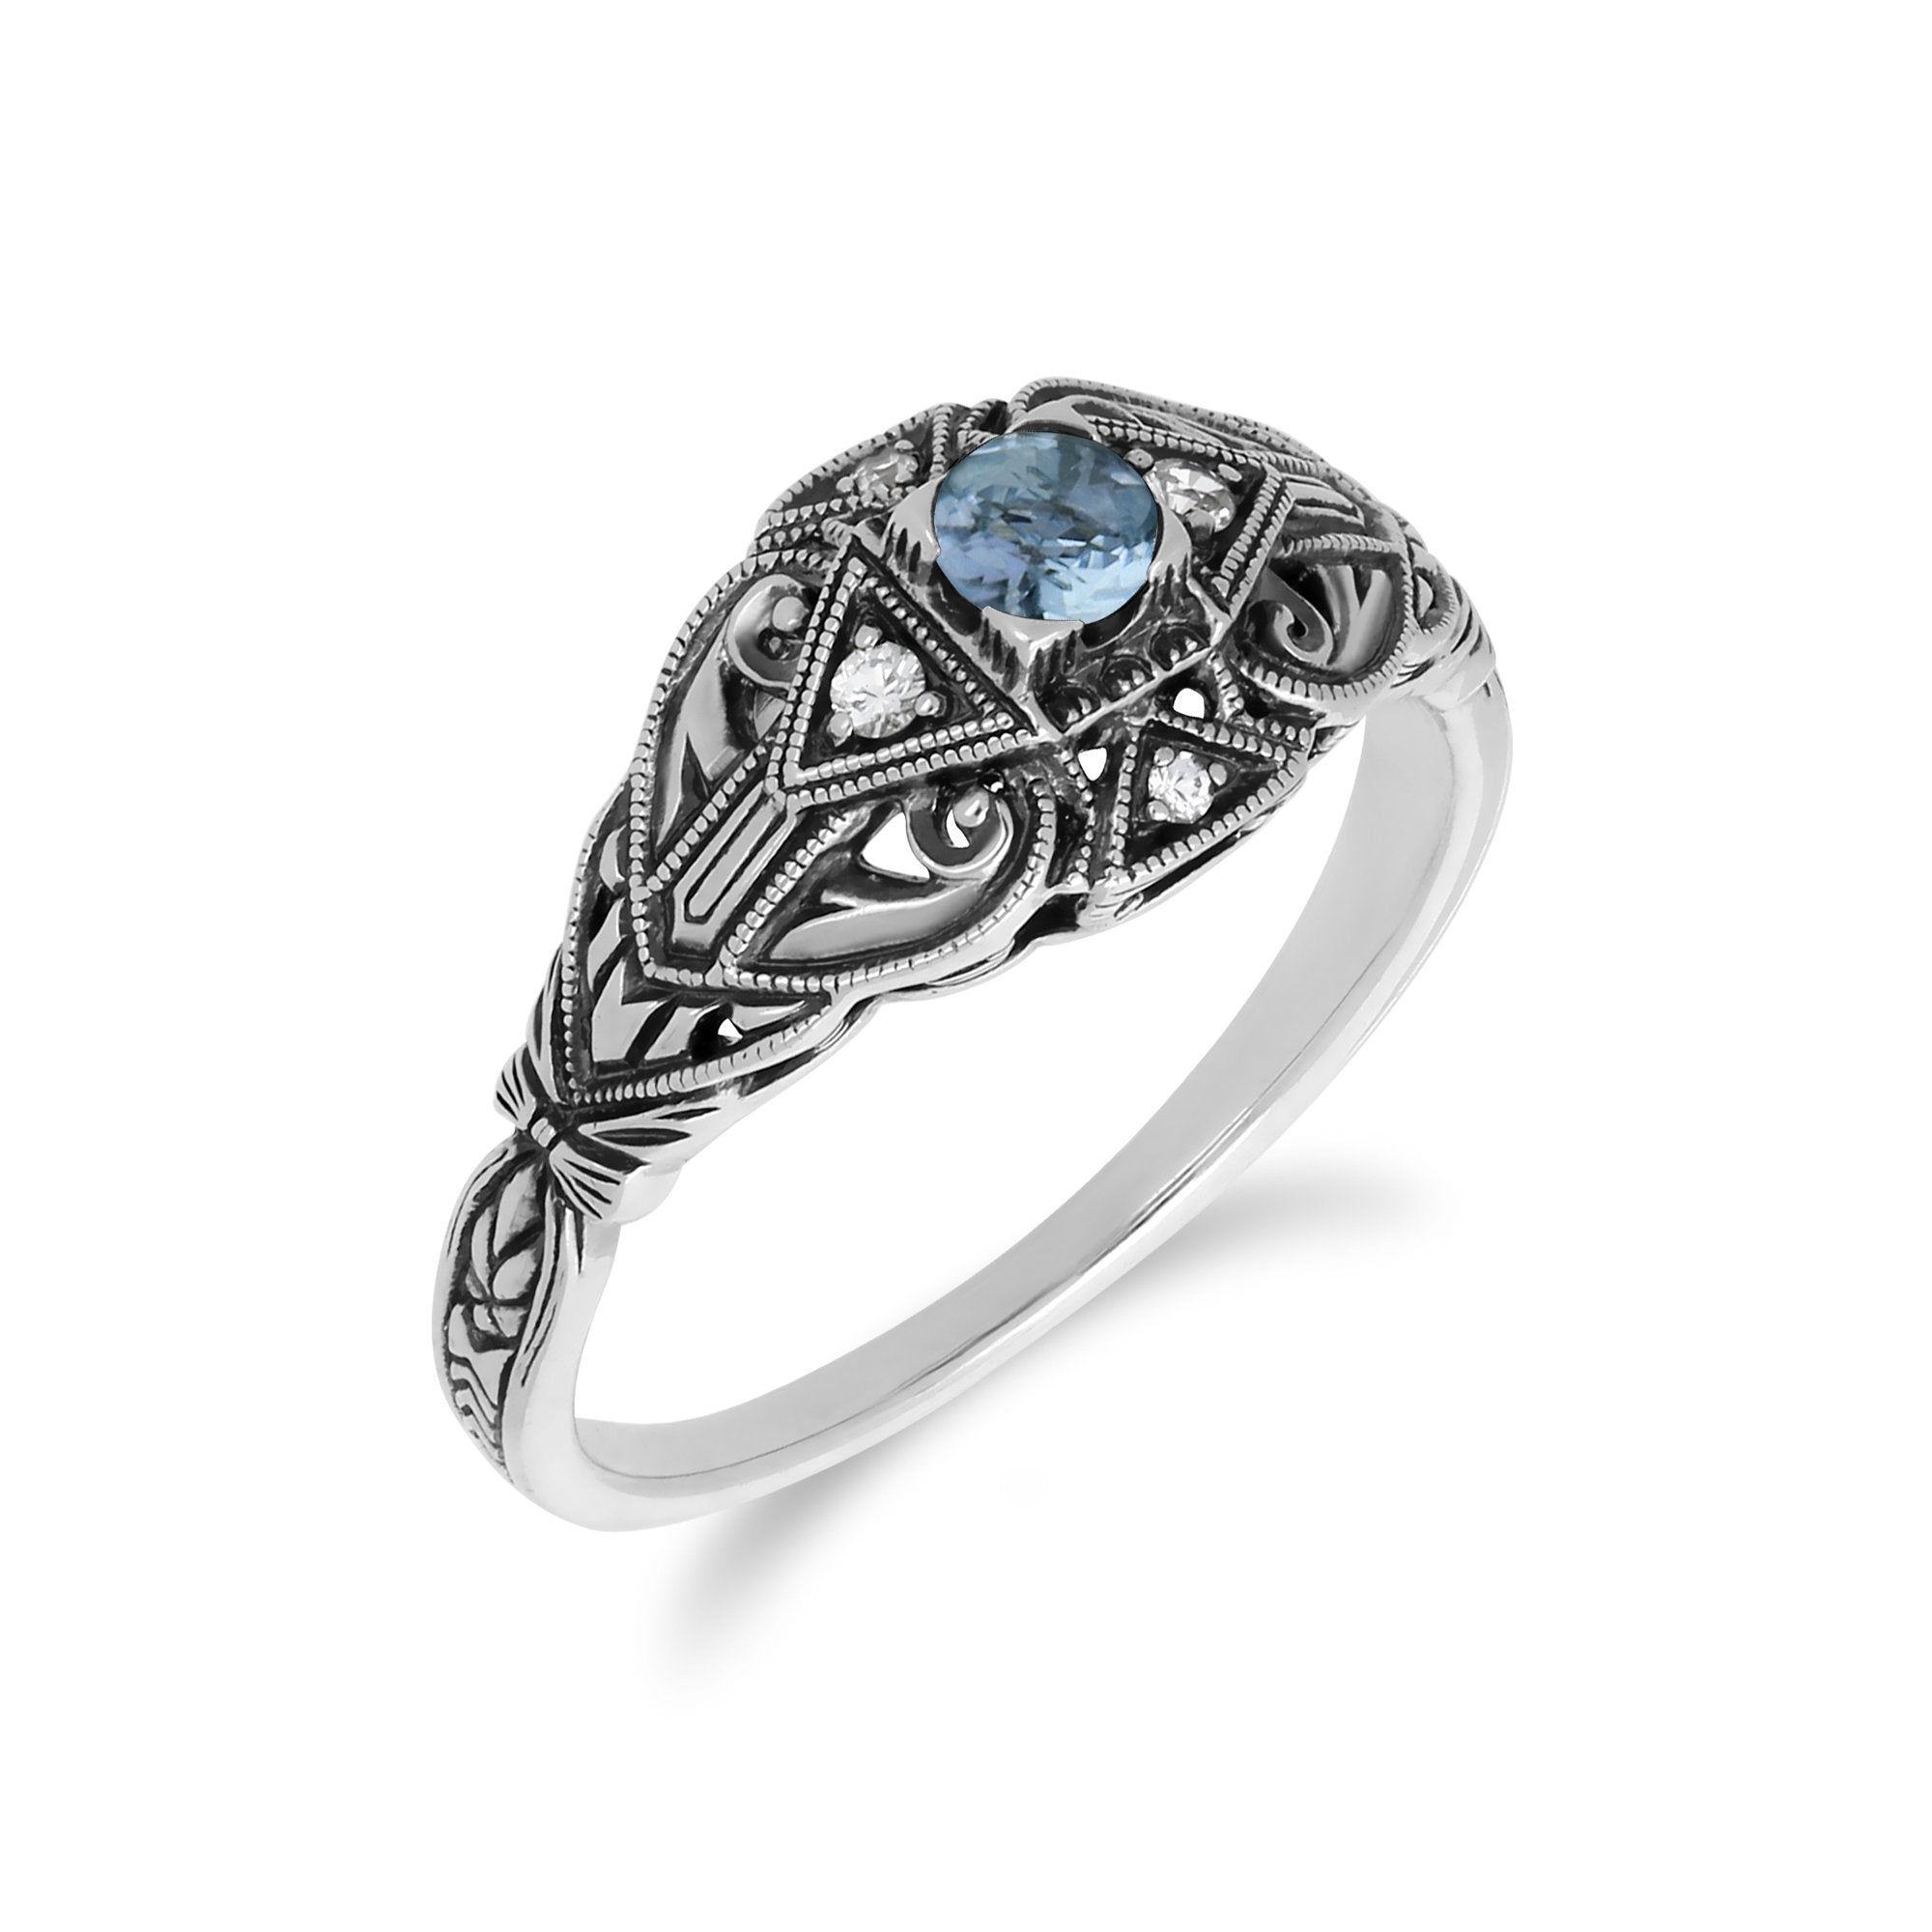 Art Deco Style Round Blue Topaz & White Topaz  Ring in 925 Sterling Silver